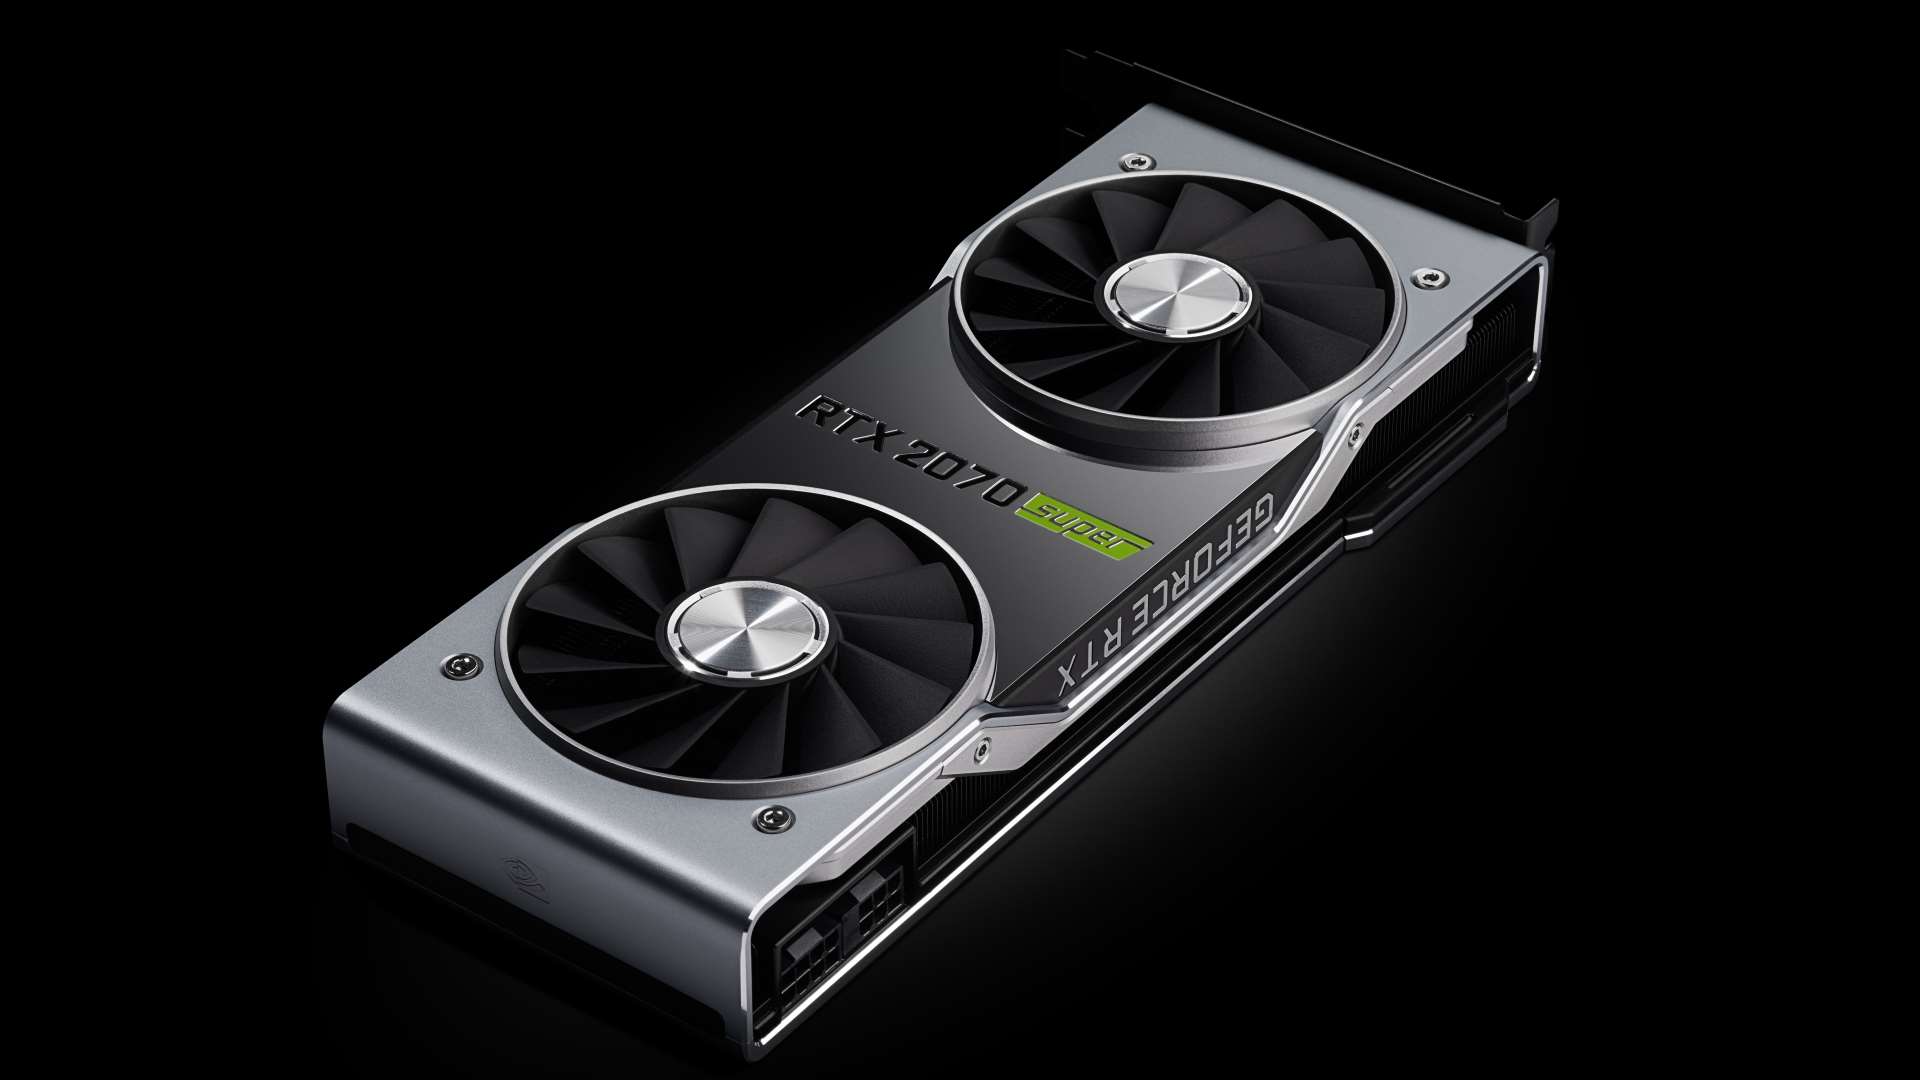 Nvidia RTX 2070 Super review: the RX 5700 XT runs it close, but GeForce just has the edge PCGamesN